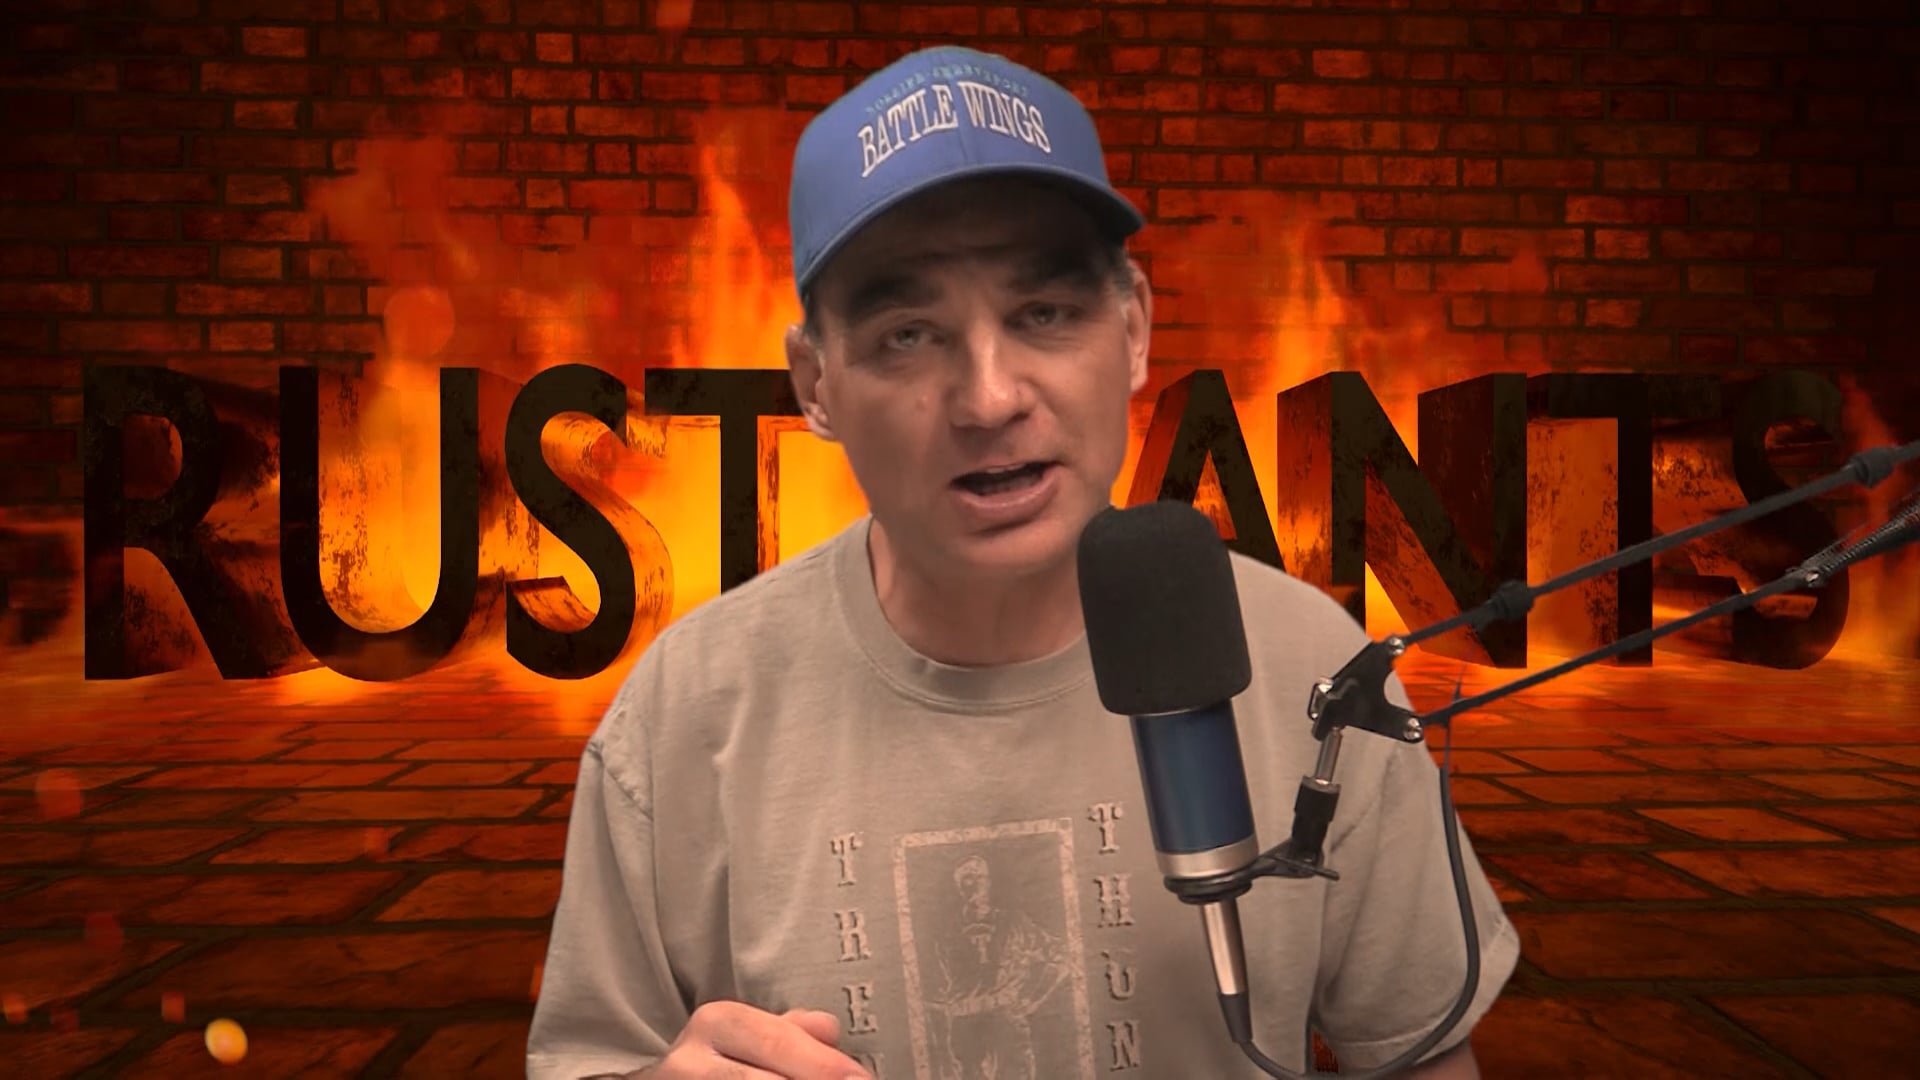 These Baseballs are Junkies! - Rust Rant 23 - Presented by KYCA